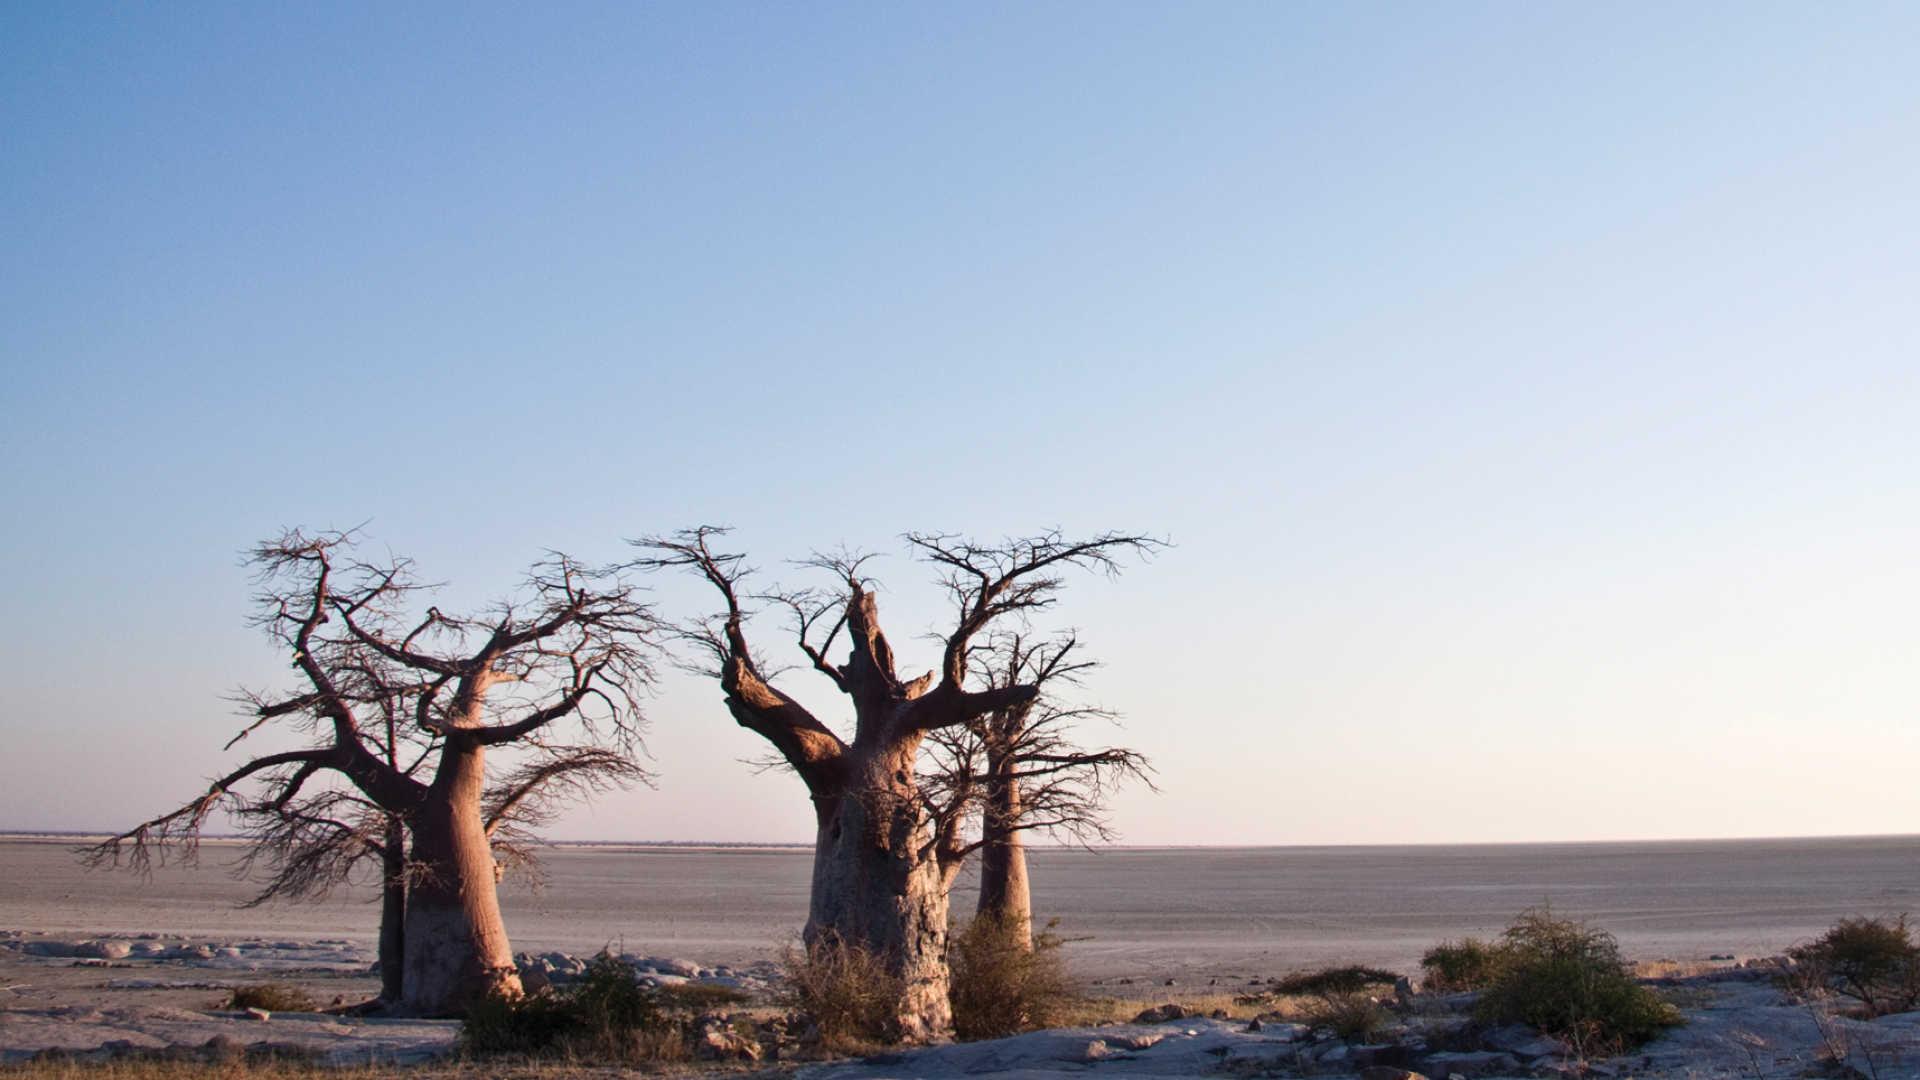 Makgadikgadi Pans Holidays. Book For 2019 2020 With Our